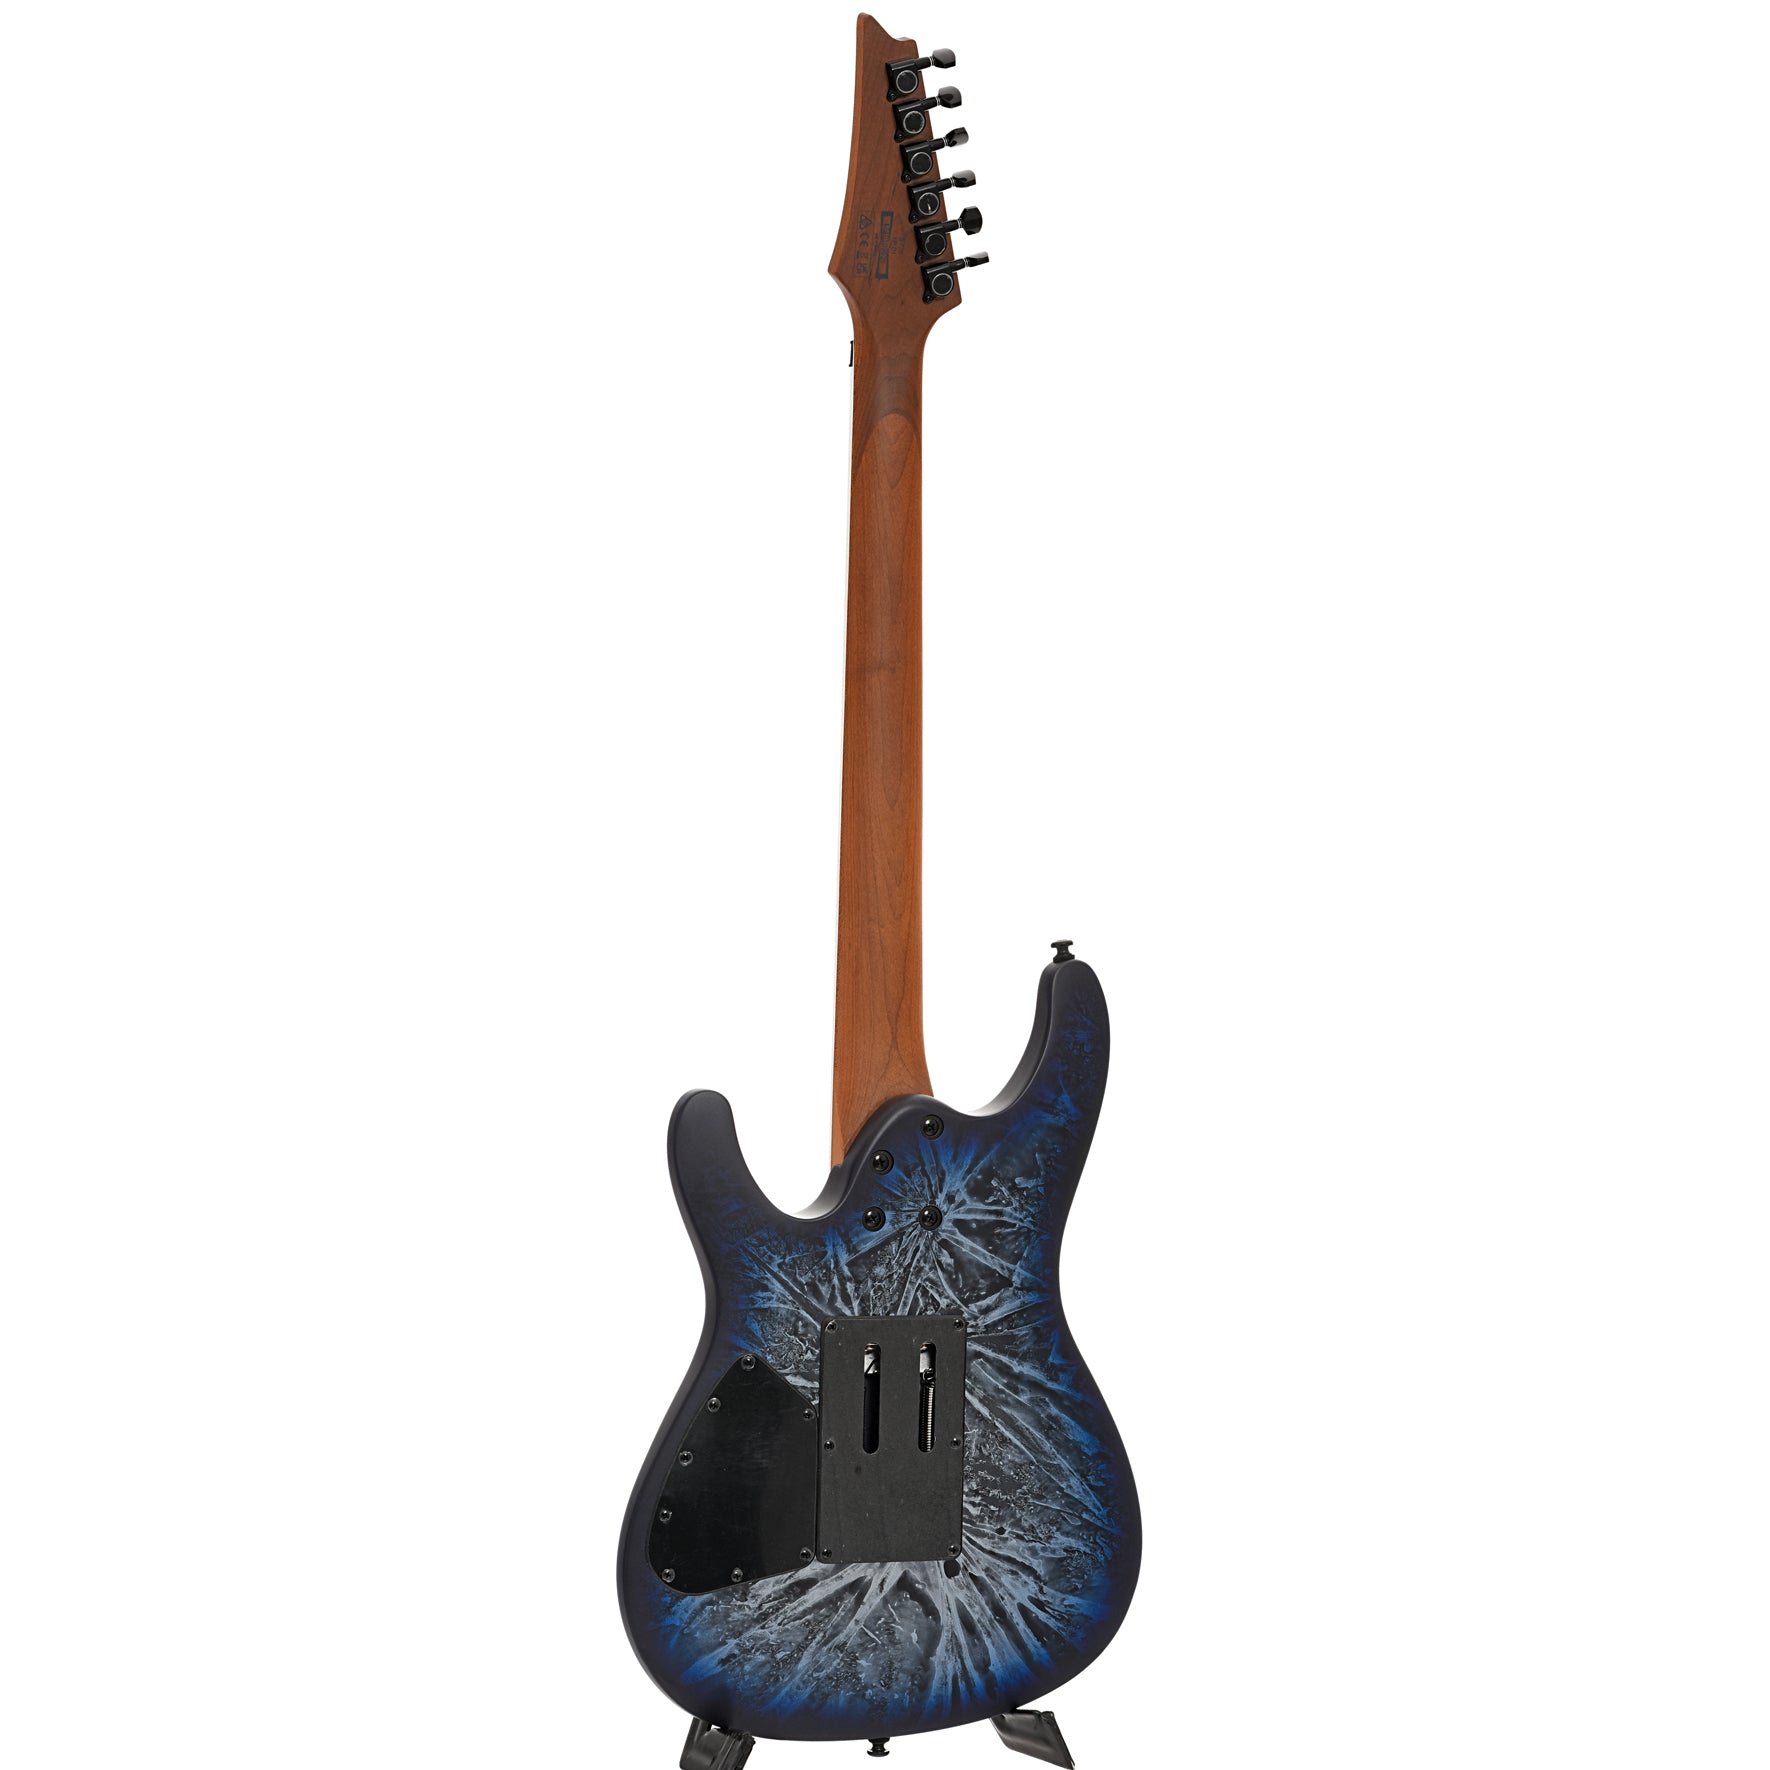 Full back and side of Ibanez B-Stock S770 Electric Guitar, Cosmic Blue Frozen Matte